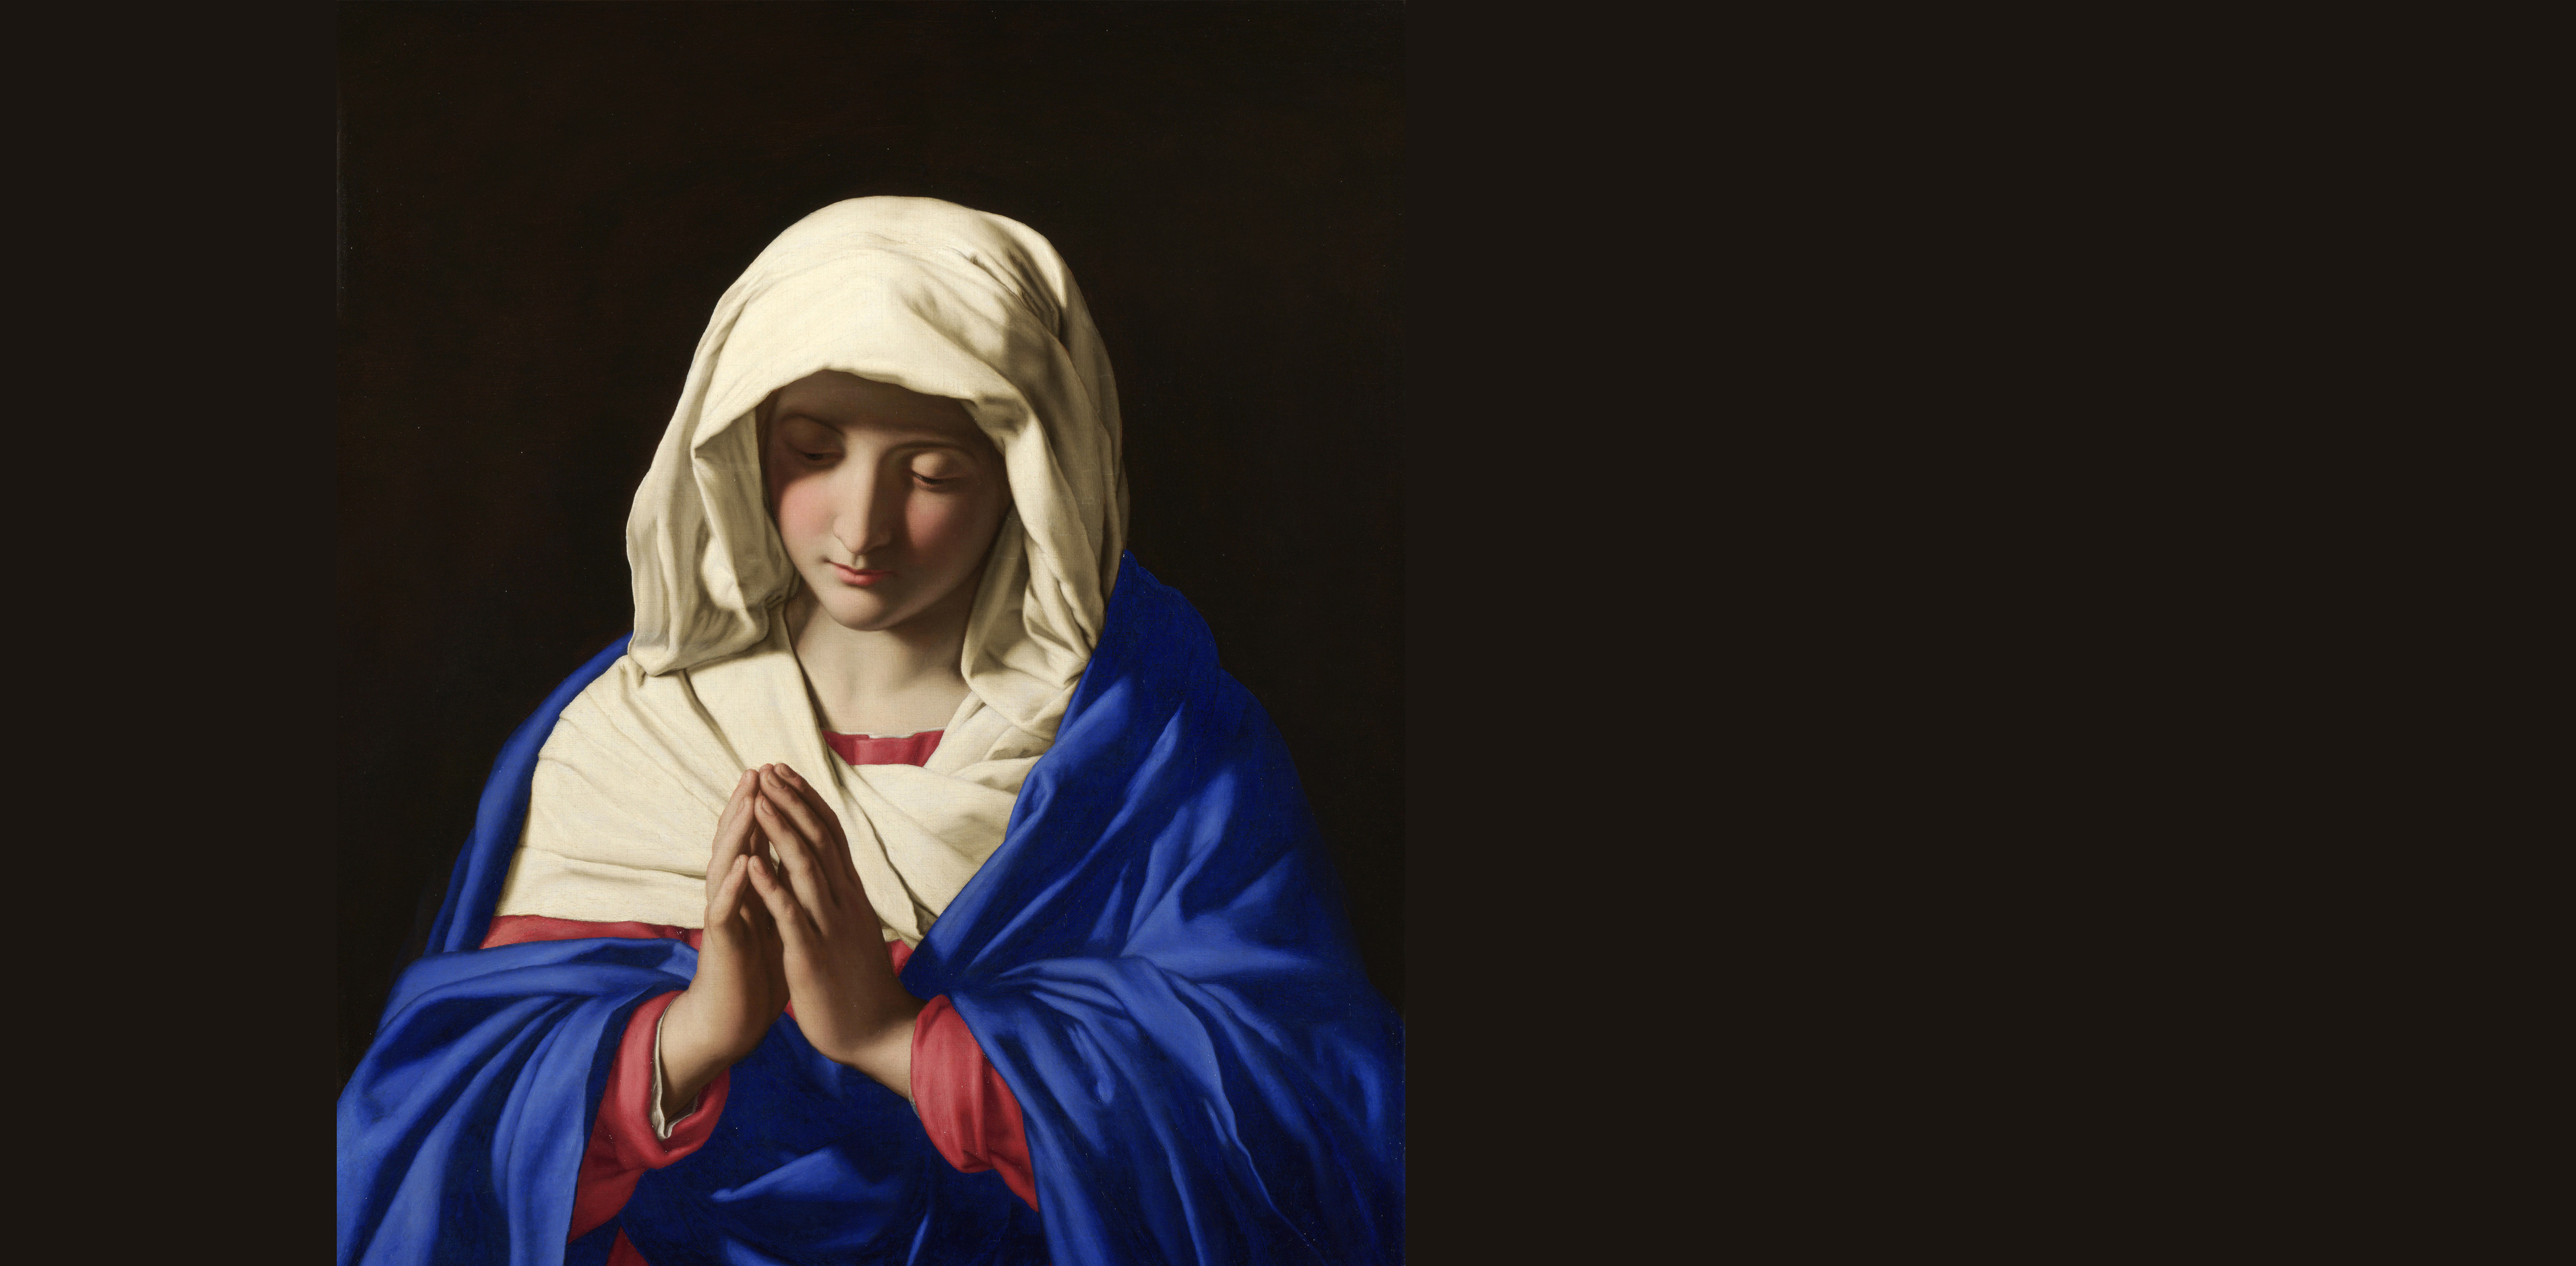 Painting of Mary praying in darkness